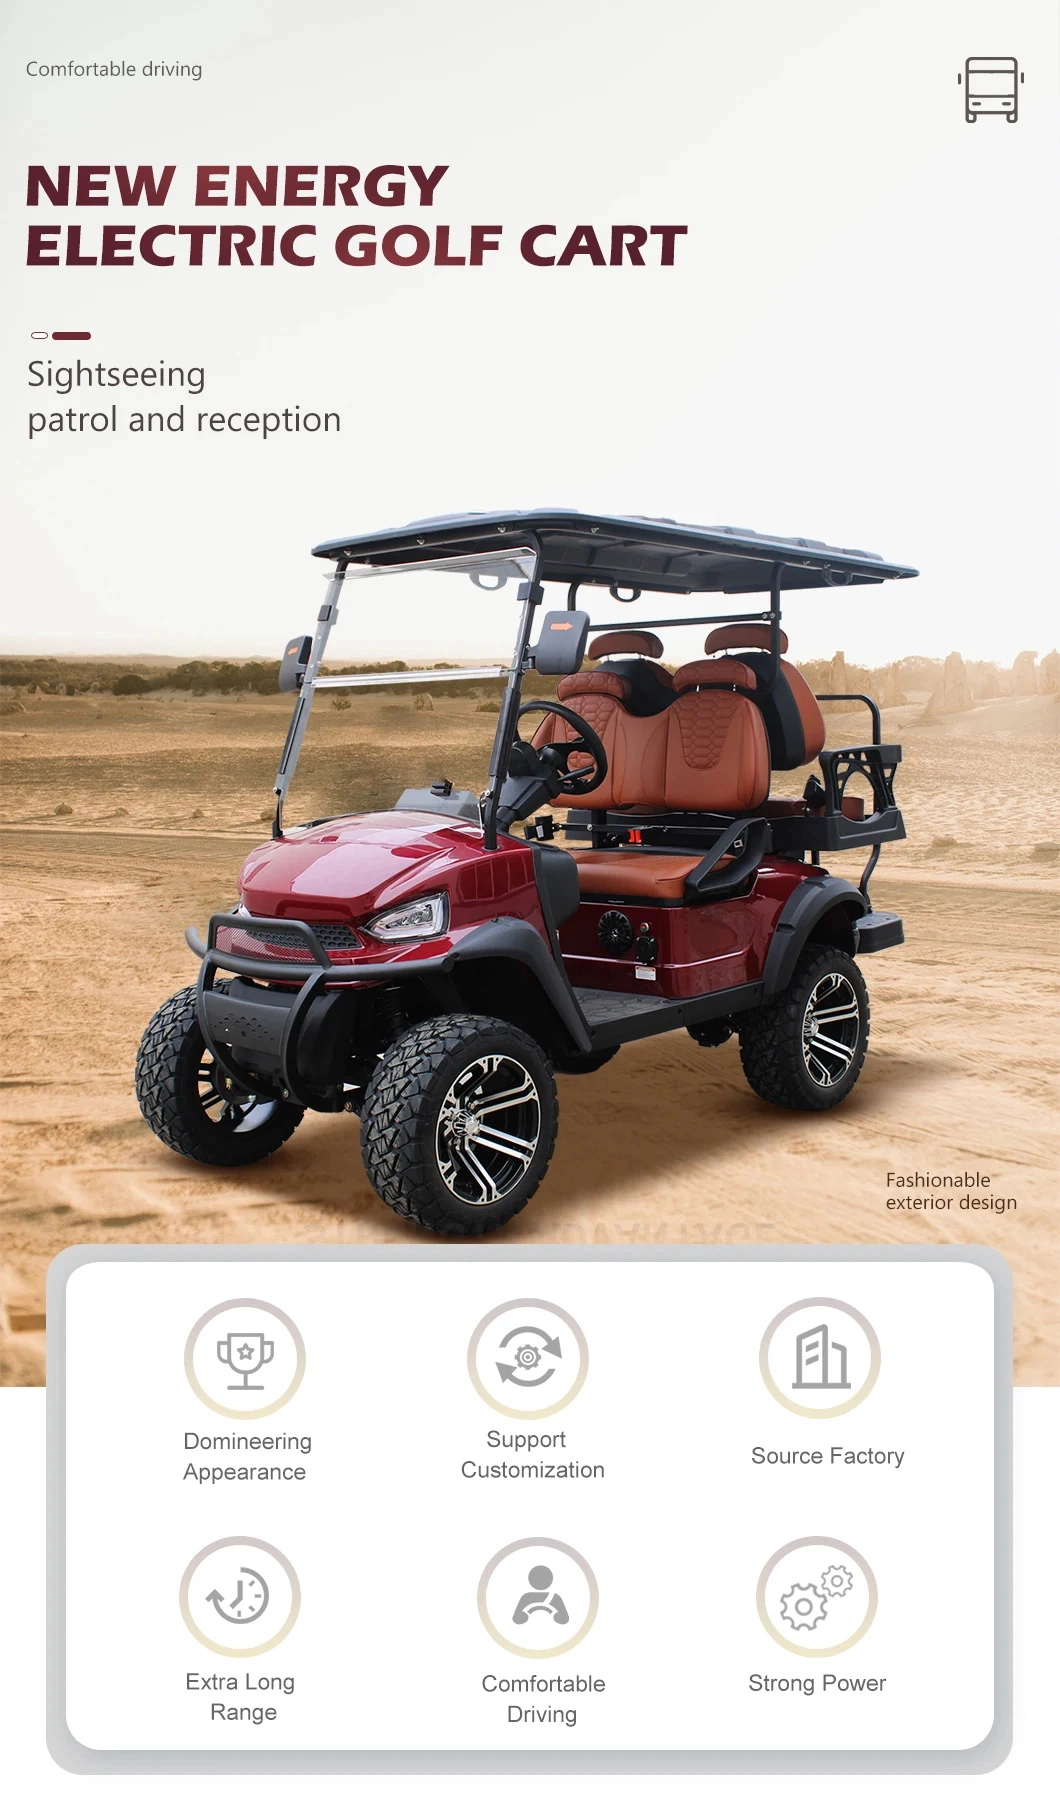 48/72V Aluminum Chassis Frame 4 Seat Electric Lithium Battery Golf Buggy Hunting Cart Street Legal Golf Cart Vehicle